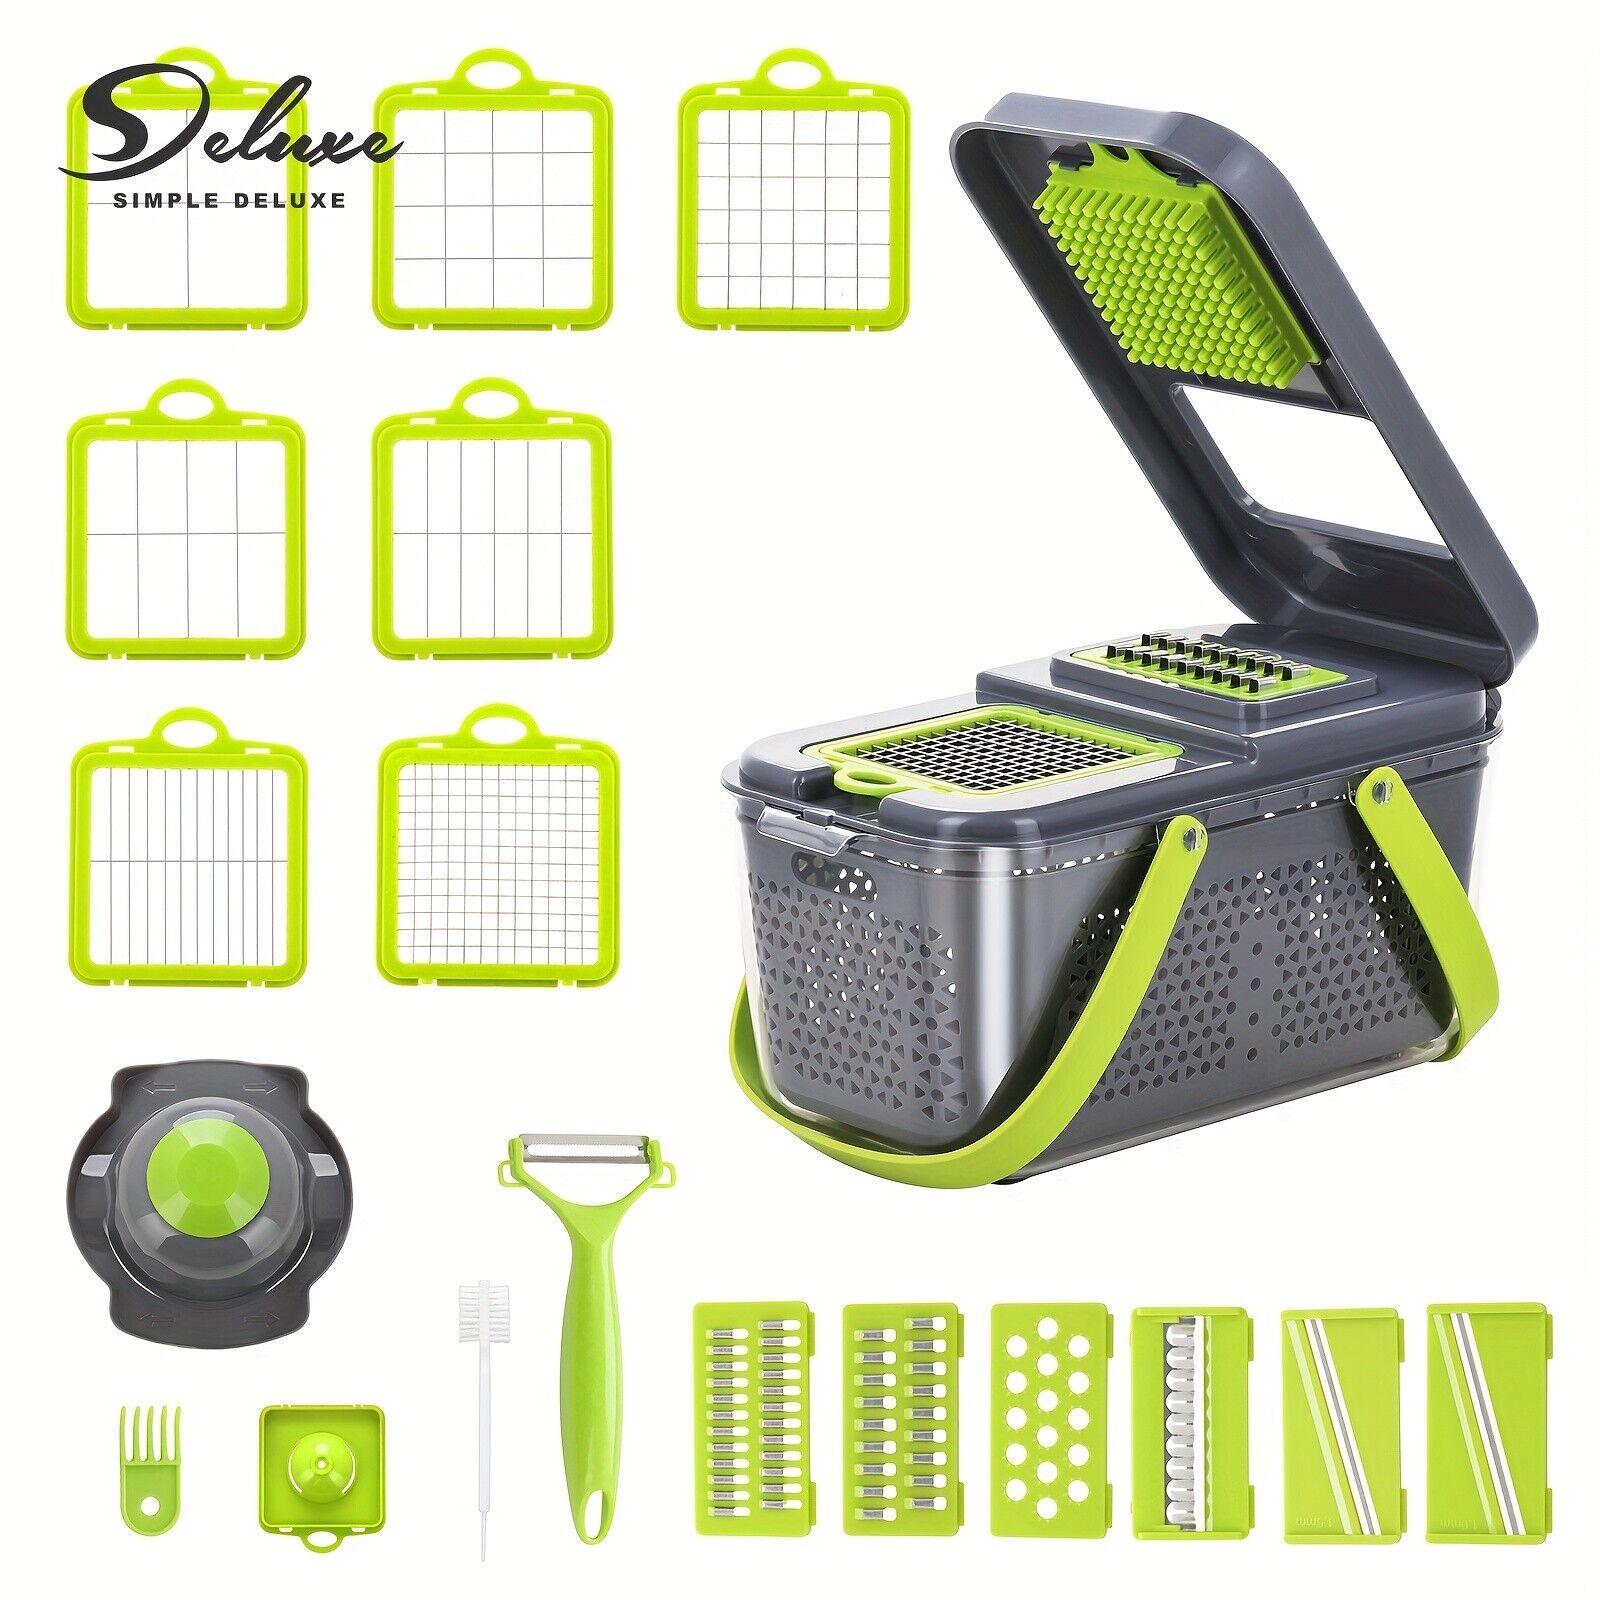 22-in-1 Multifunctional Vegetable Chopper Set - Efficient & Easy Dicing, Slicing